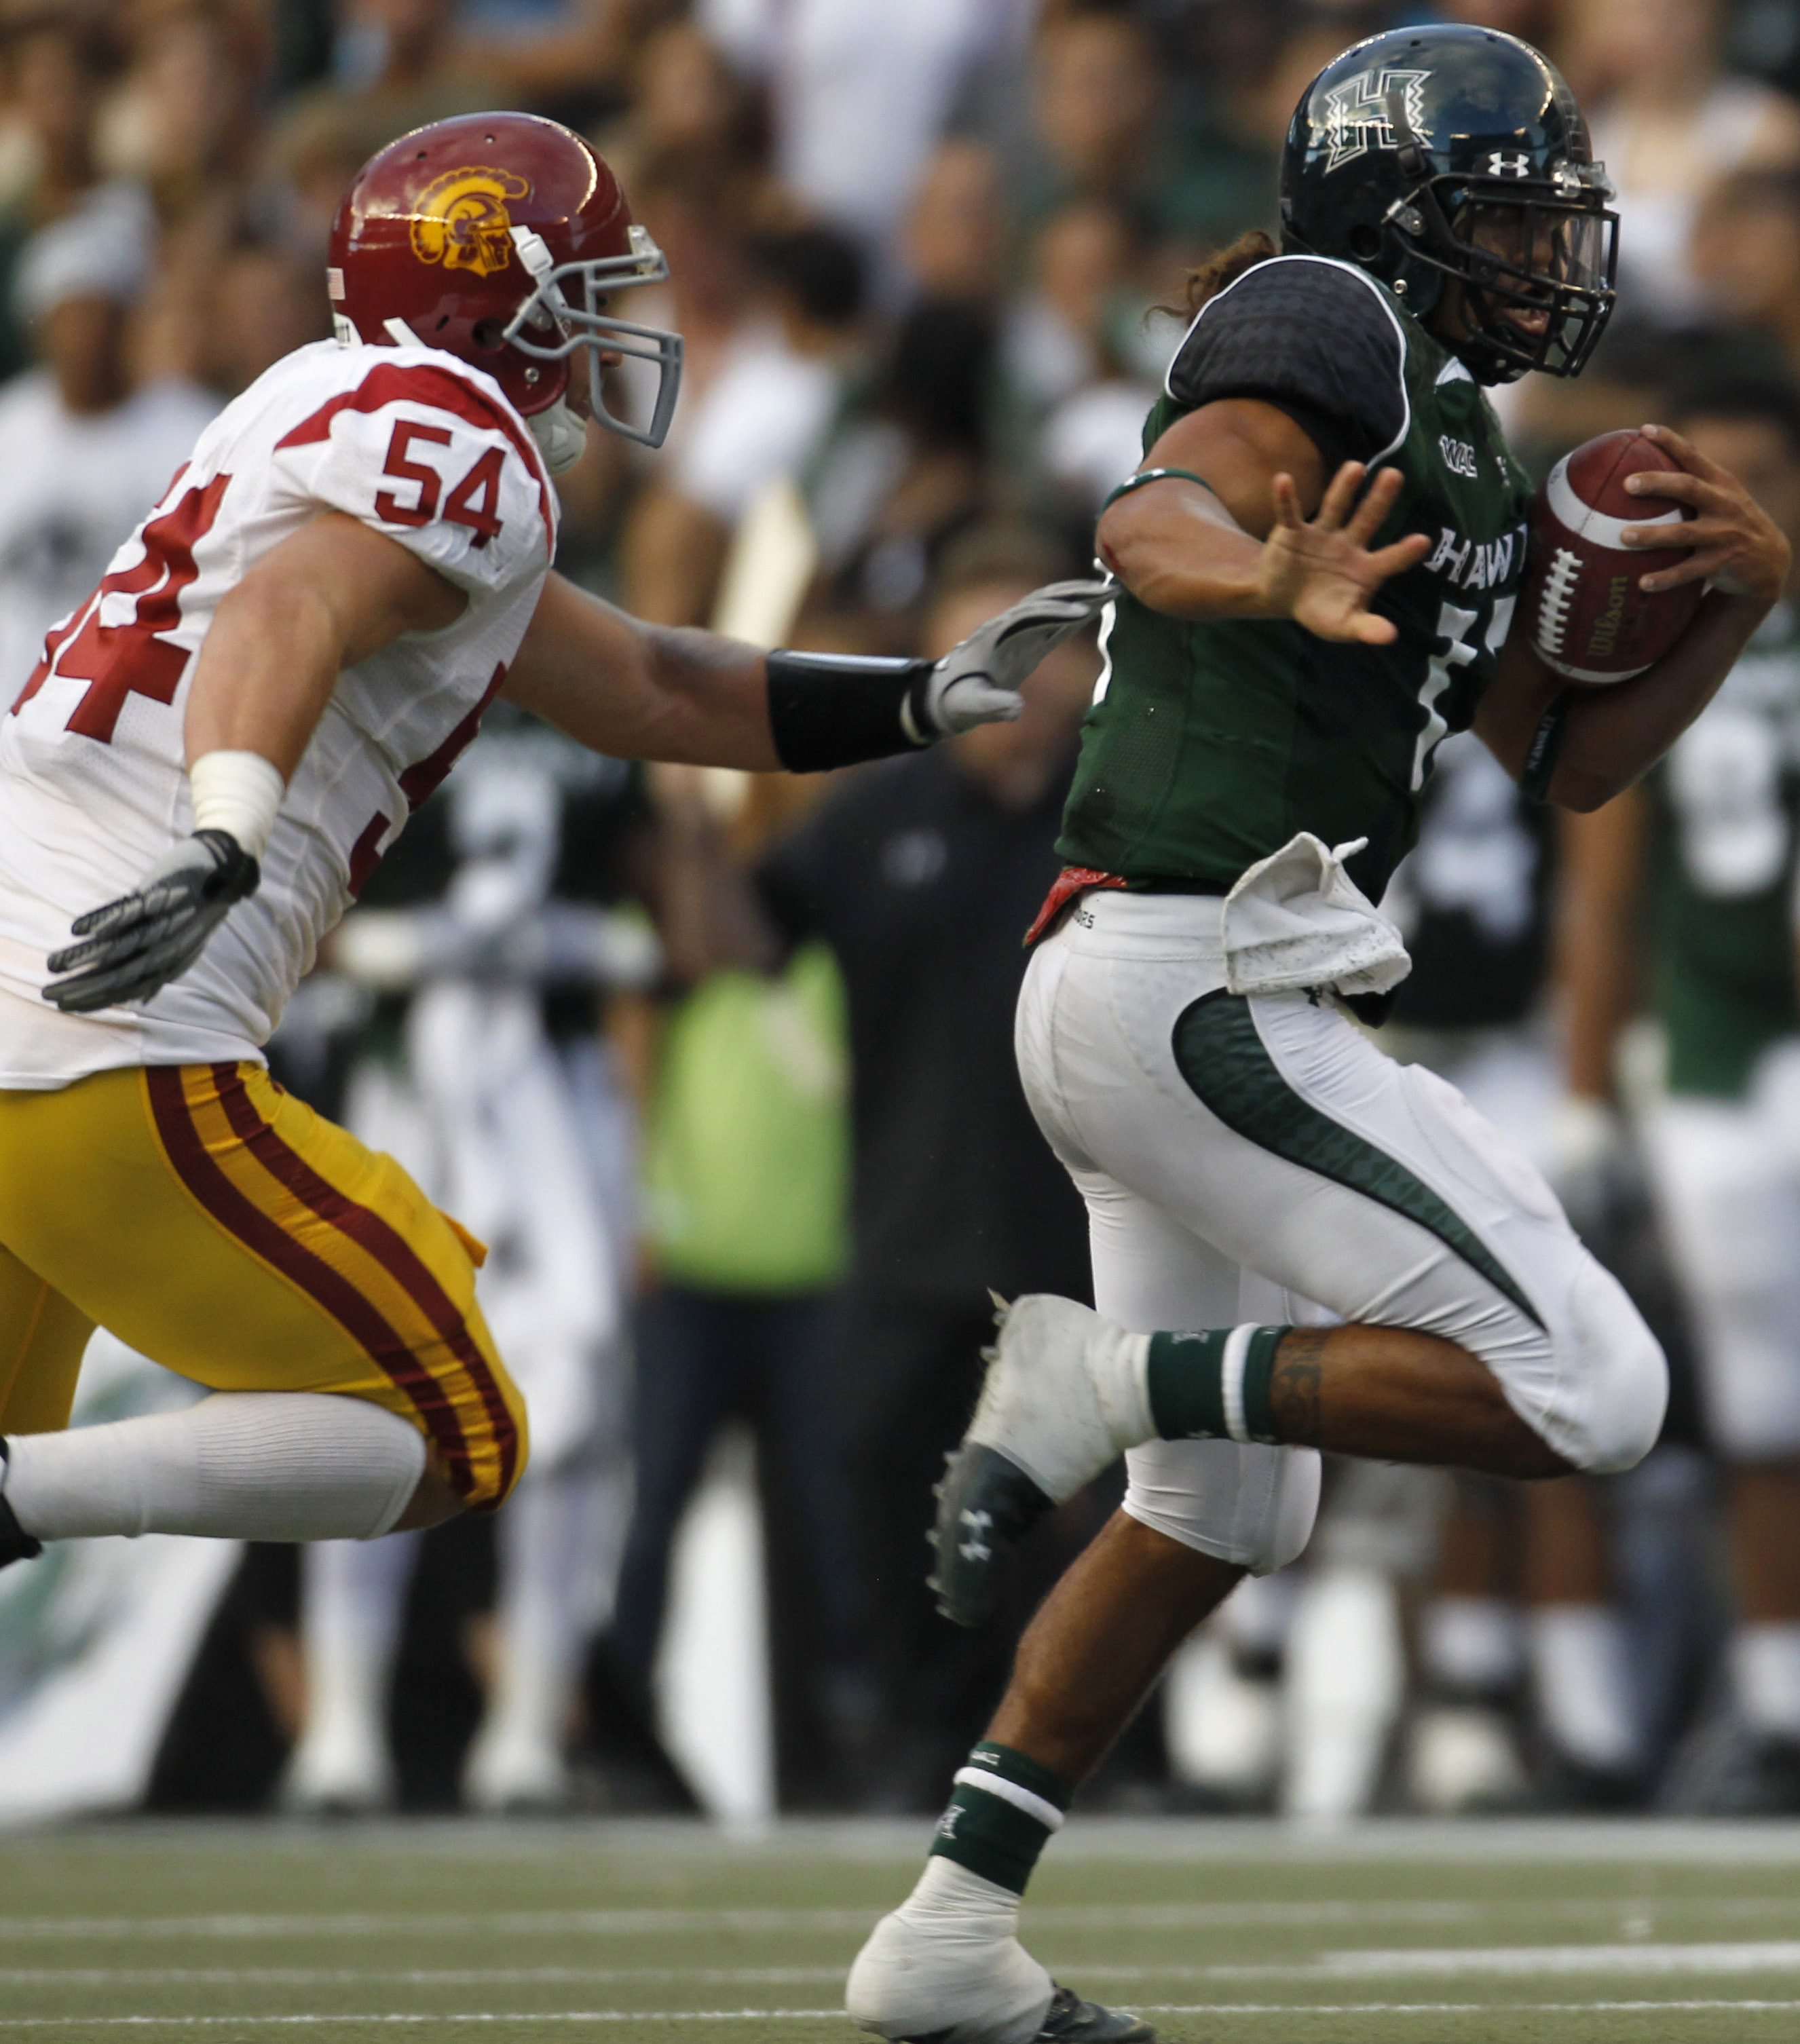 HONOLULU - SEPTEMBER 02: Quarterback Bryant Moniz #17 of the University of Hawaii Warriors is chased by Chris Galippo #54 of the University of Southern California Trojans as he carries the ball during first half action against the University of Southern C